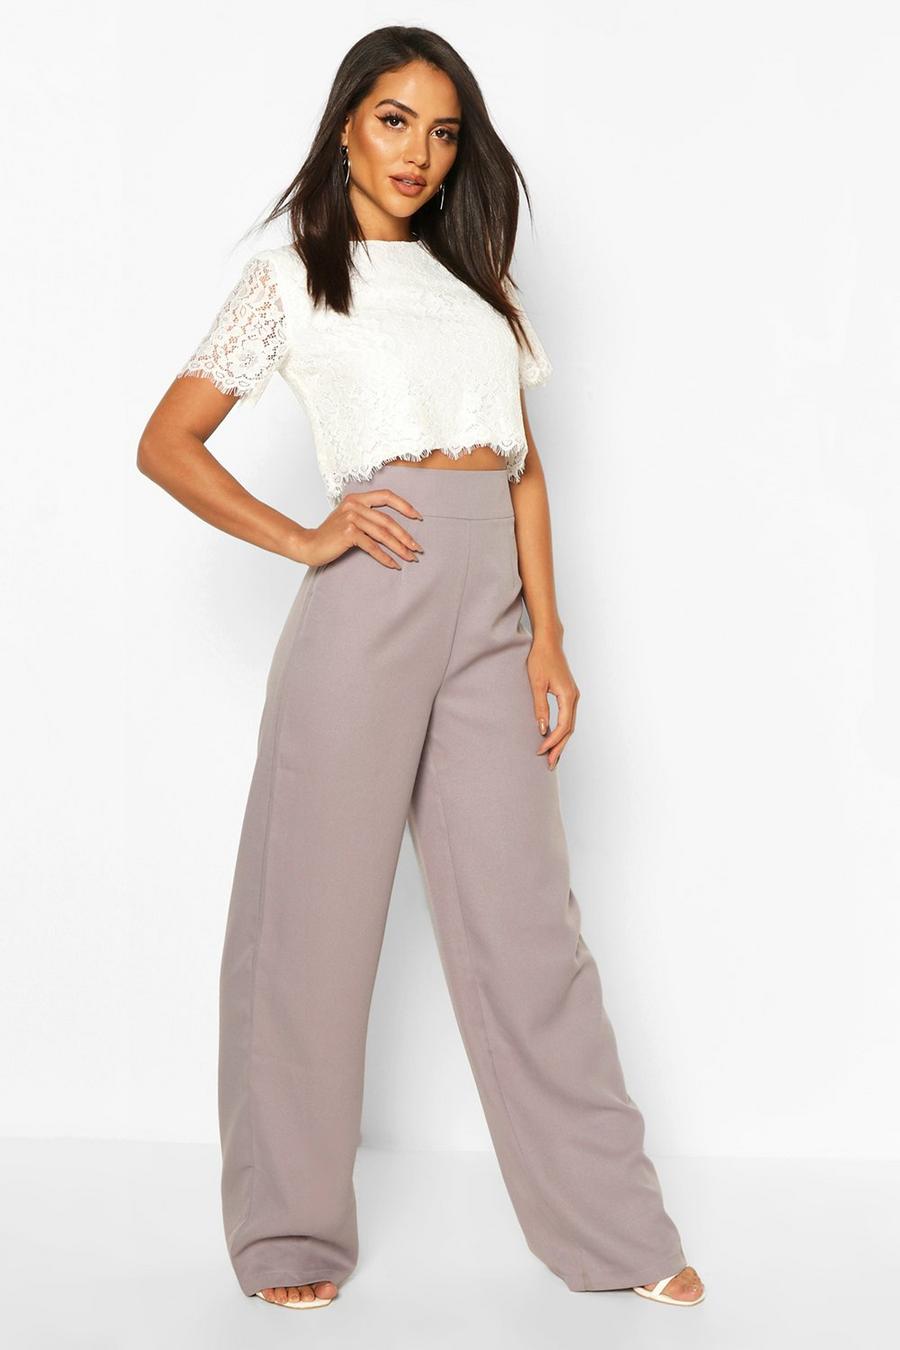 Grey Woven Lace Top & Wide Leg Pants image number 1